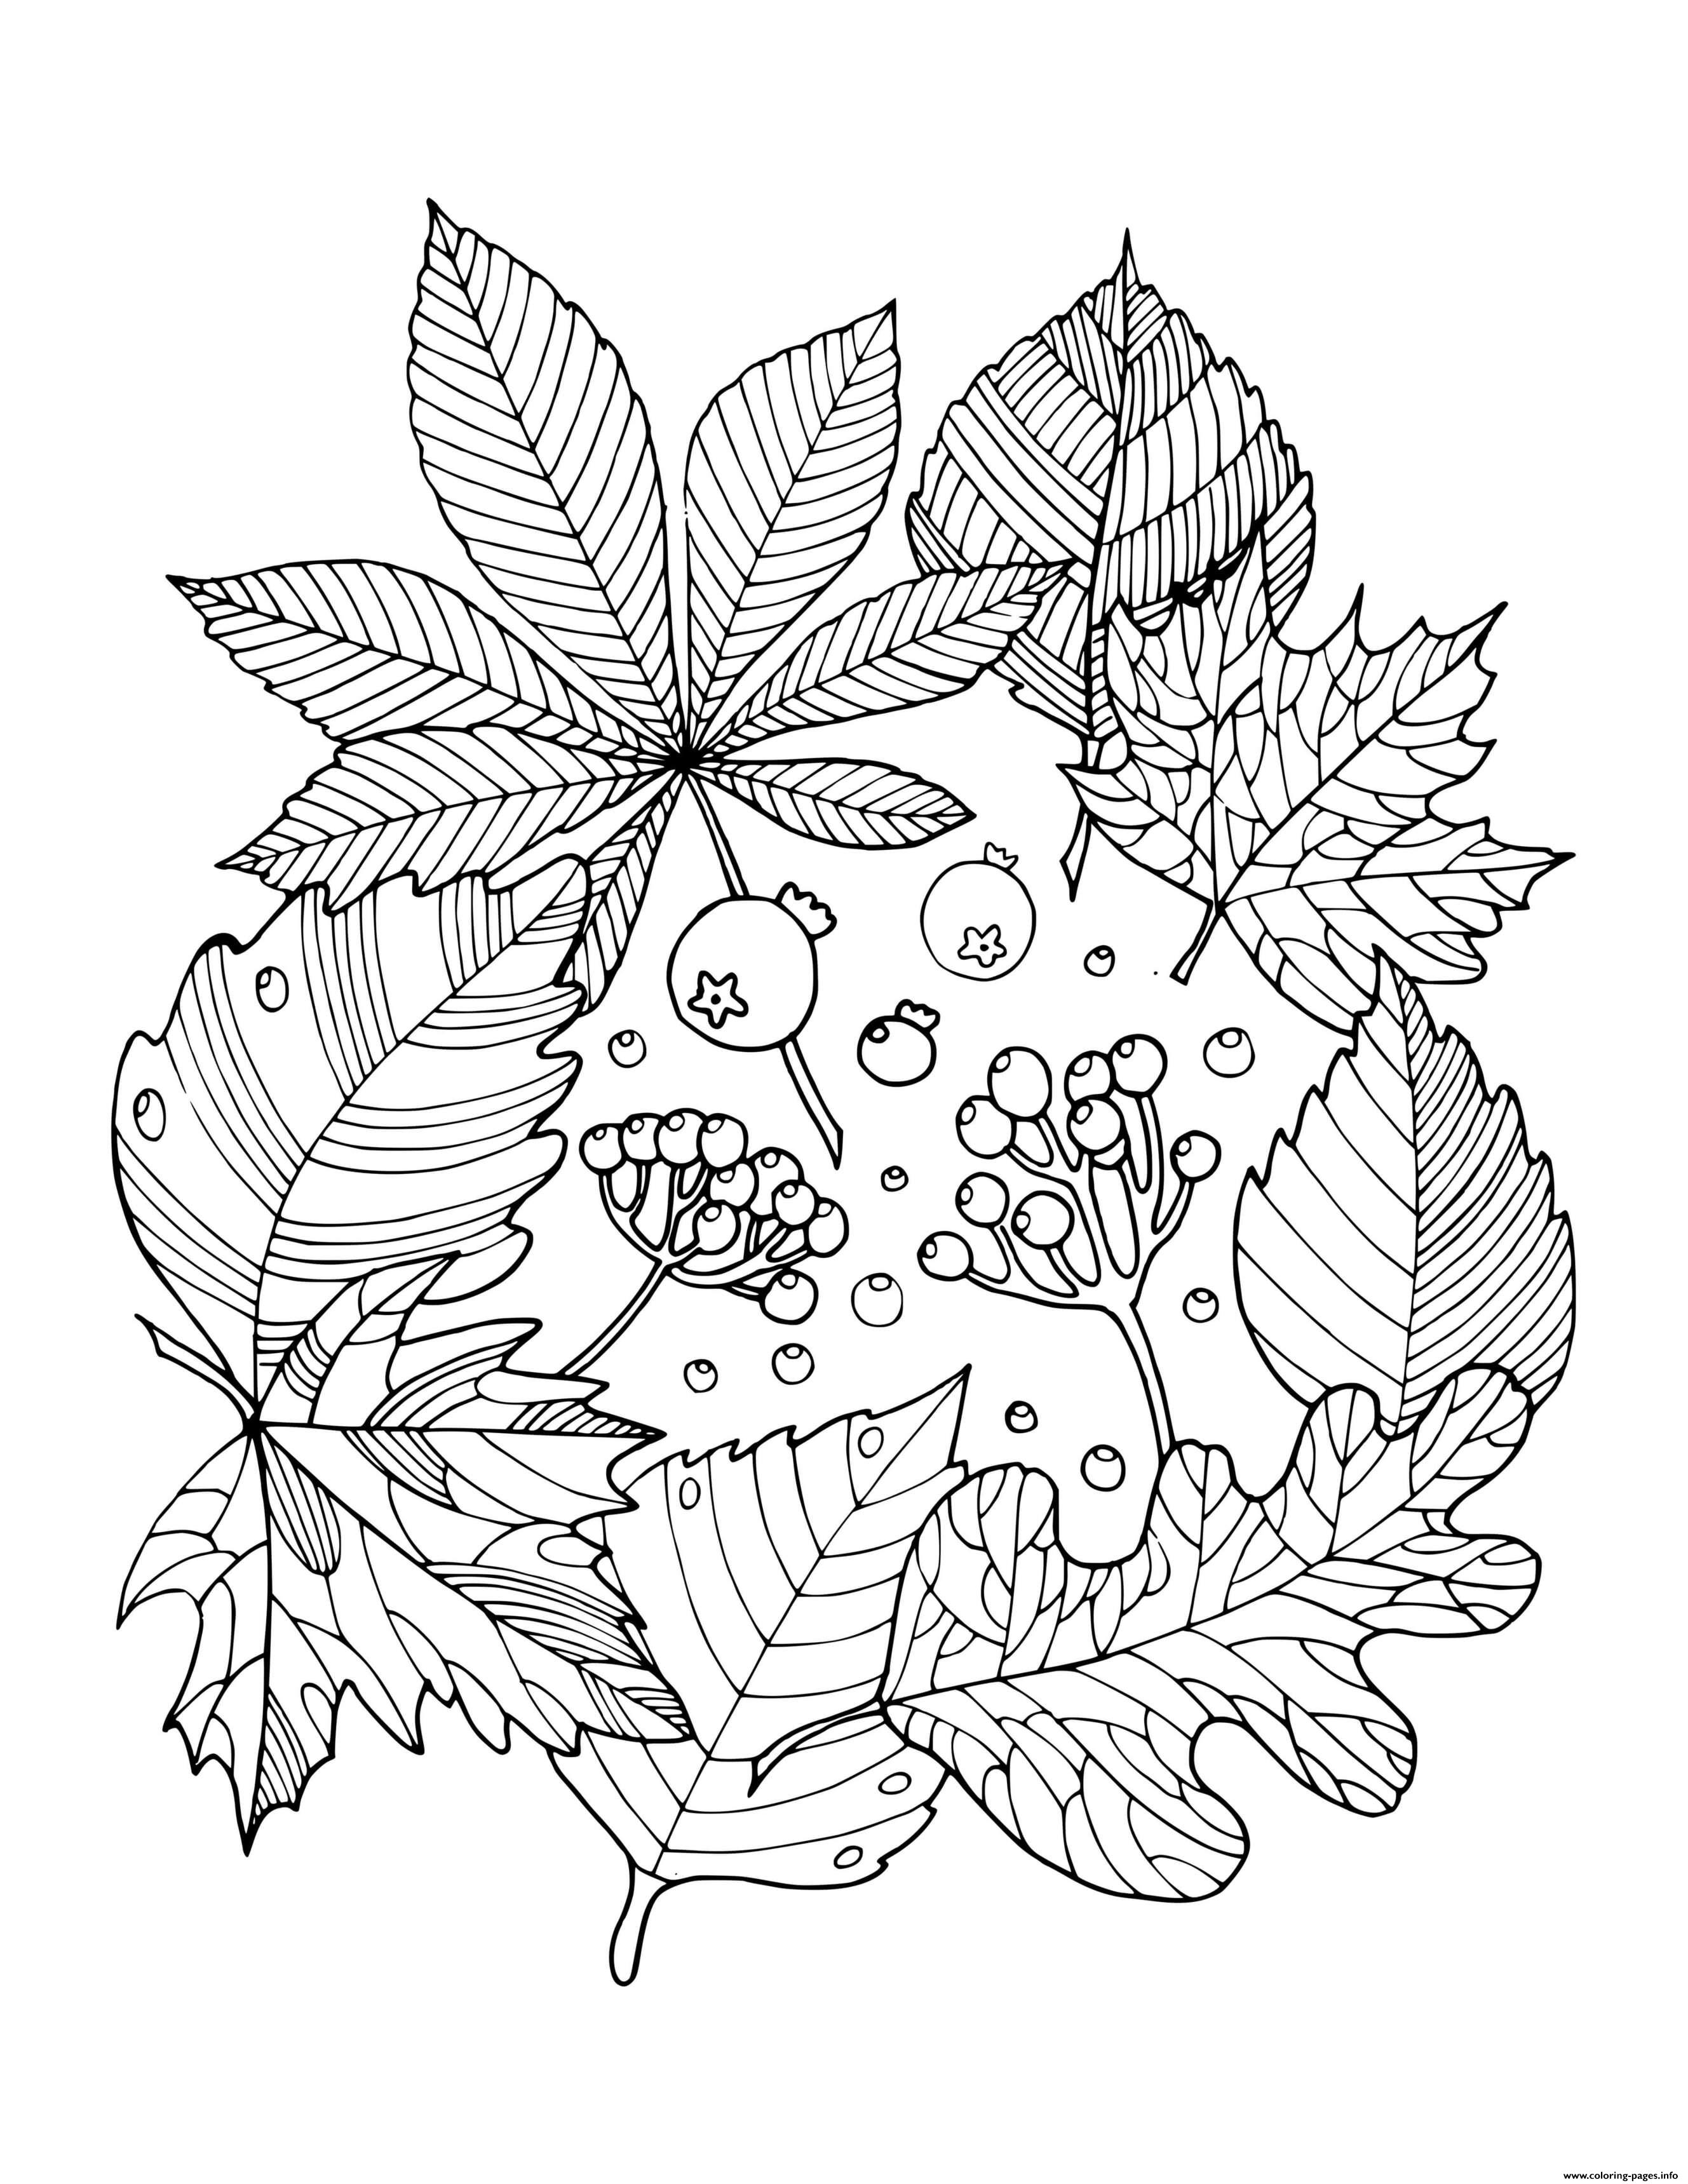 Autumn Tree Coloring Page Coloriage Automne Page De Coloriage Coloriage ...